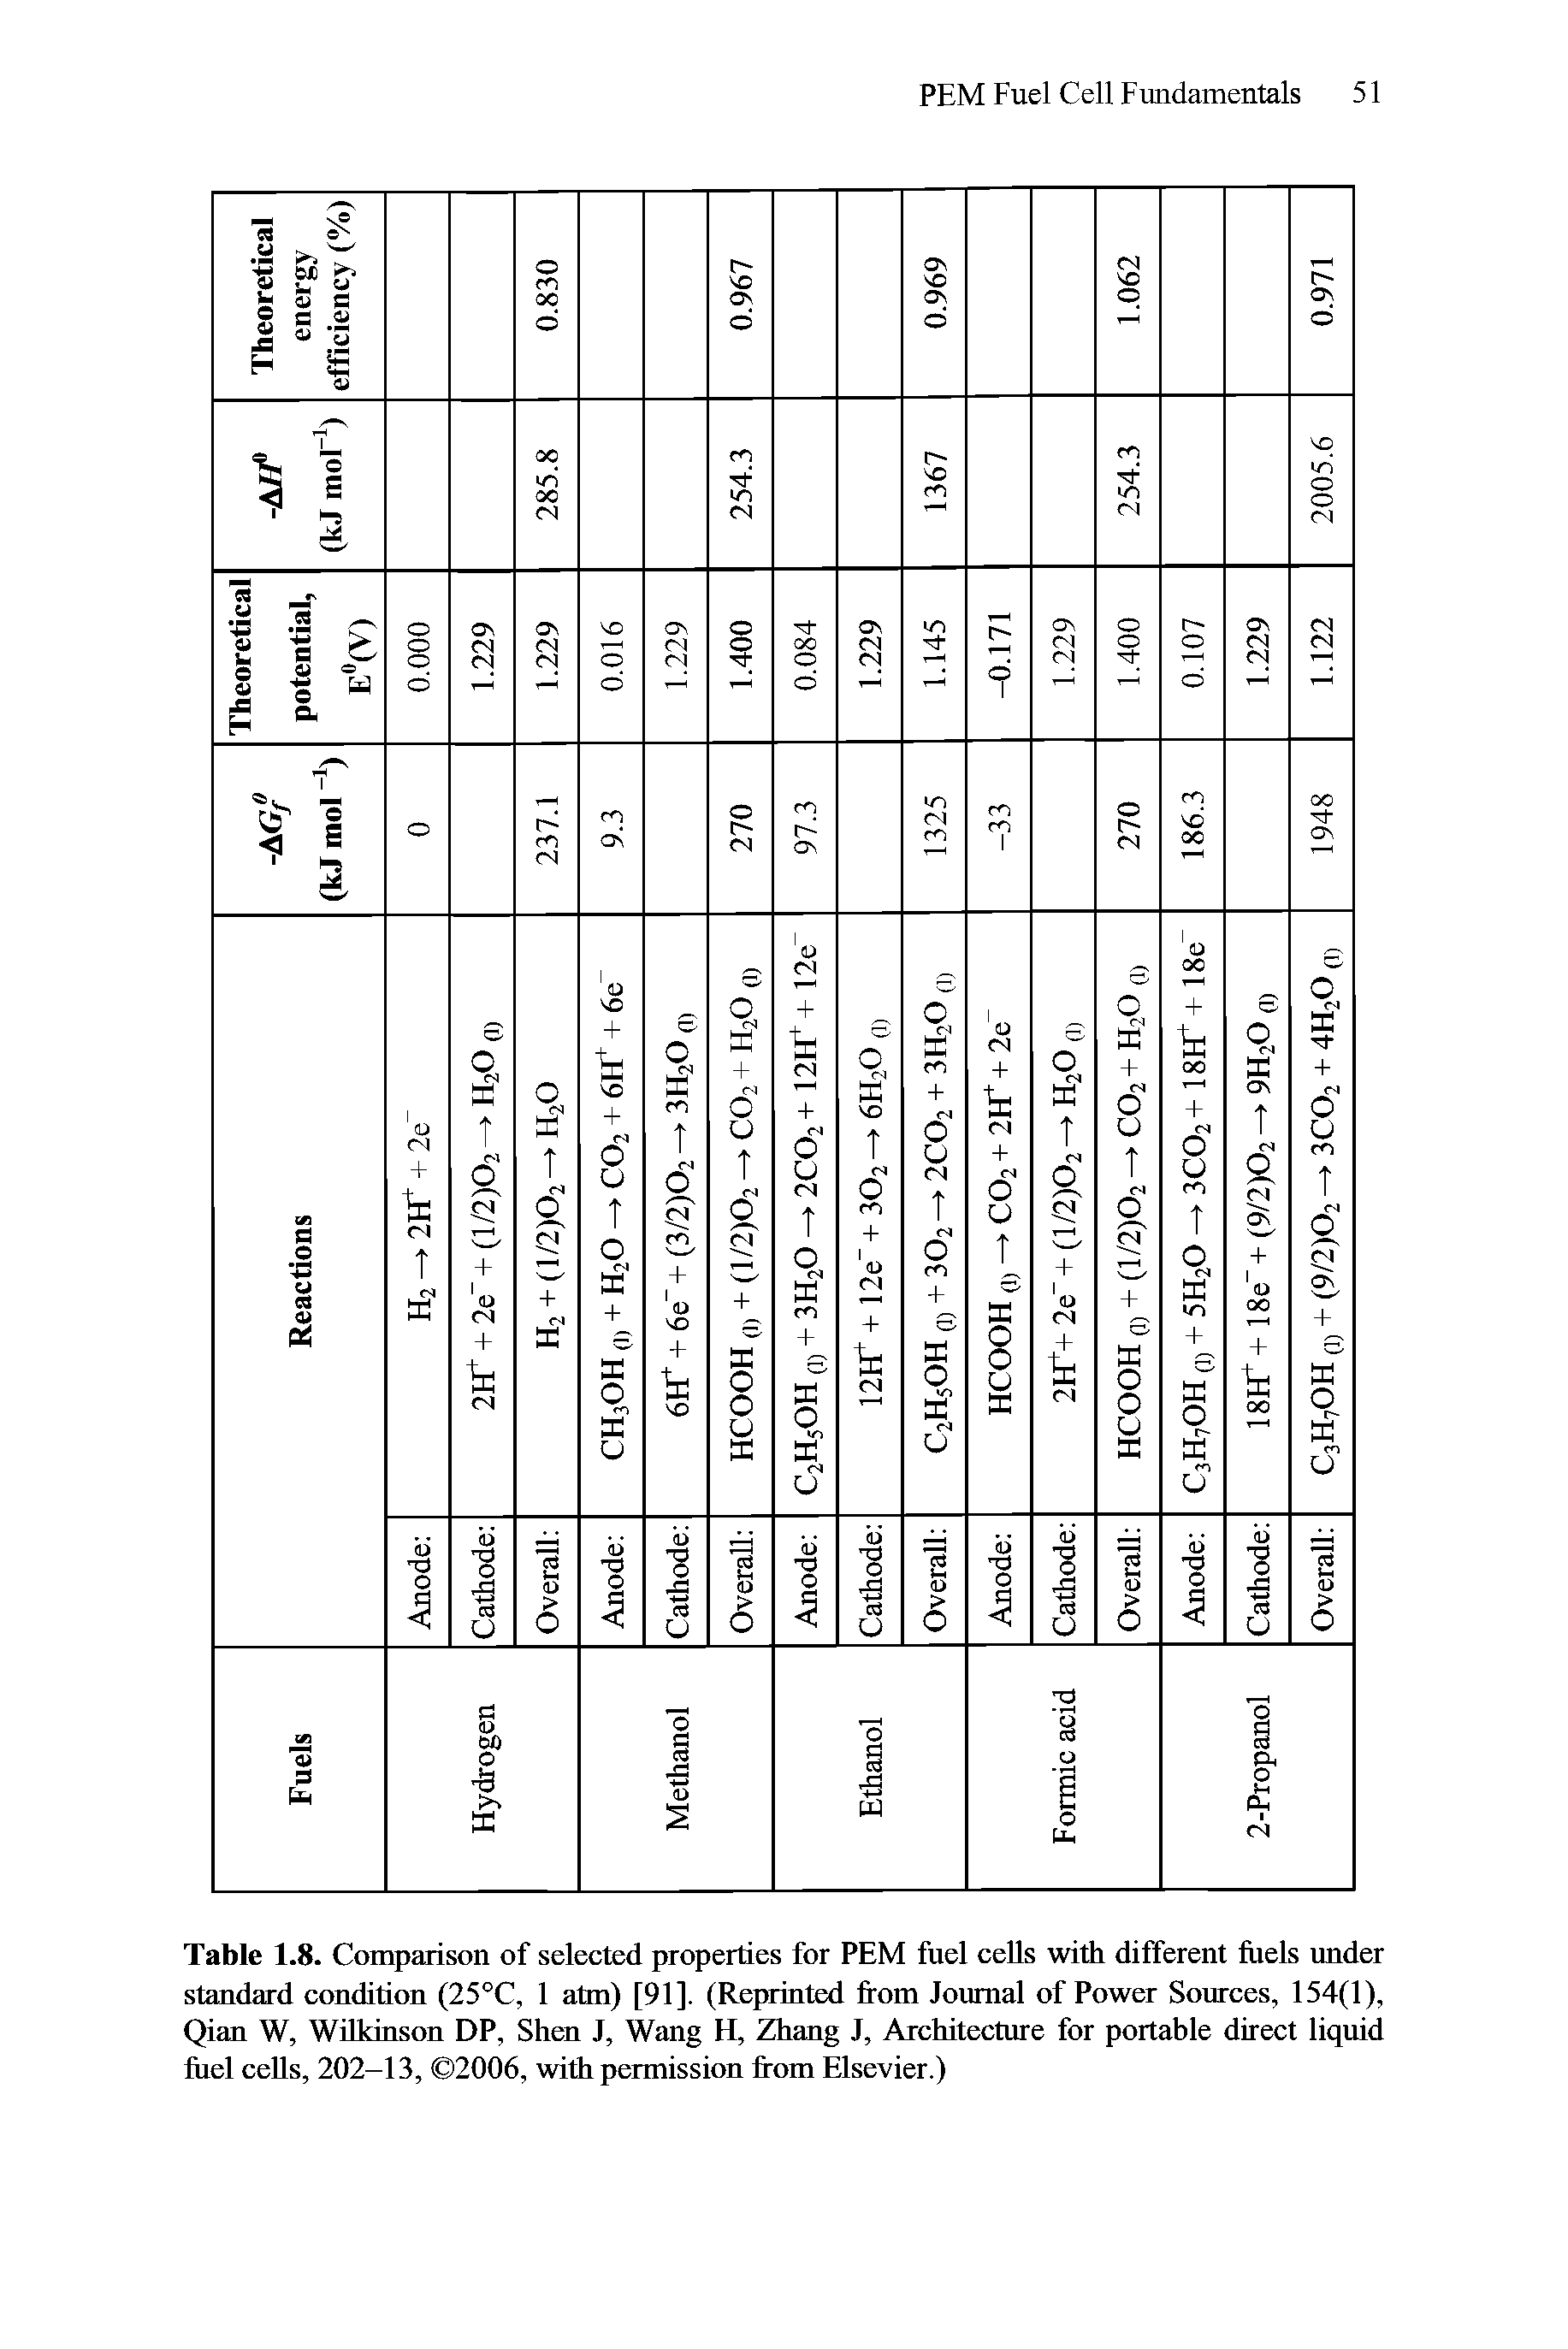 Table 1.8. Comparison of selected properties for PEM fuel cells with different fuels under standard condition (25 C, 1 atm) [91]. (Reprinted from Journal of Power Sources, 154(1), Qian W, Wilkinson DP, Shen J, Wang H, Zhang J, Architecture for portable direct liquid fuel cells, 202-13, 2006, with permission from Elsevier.)...